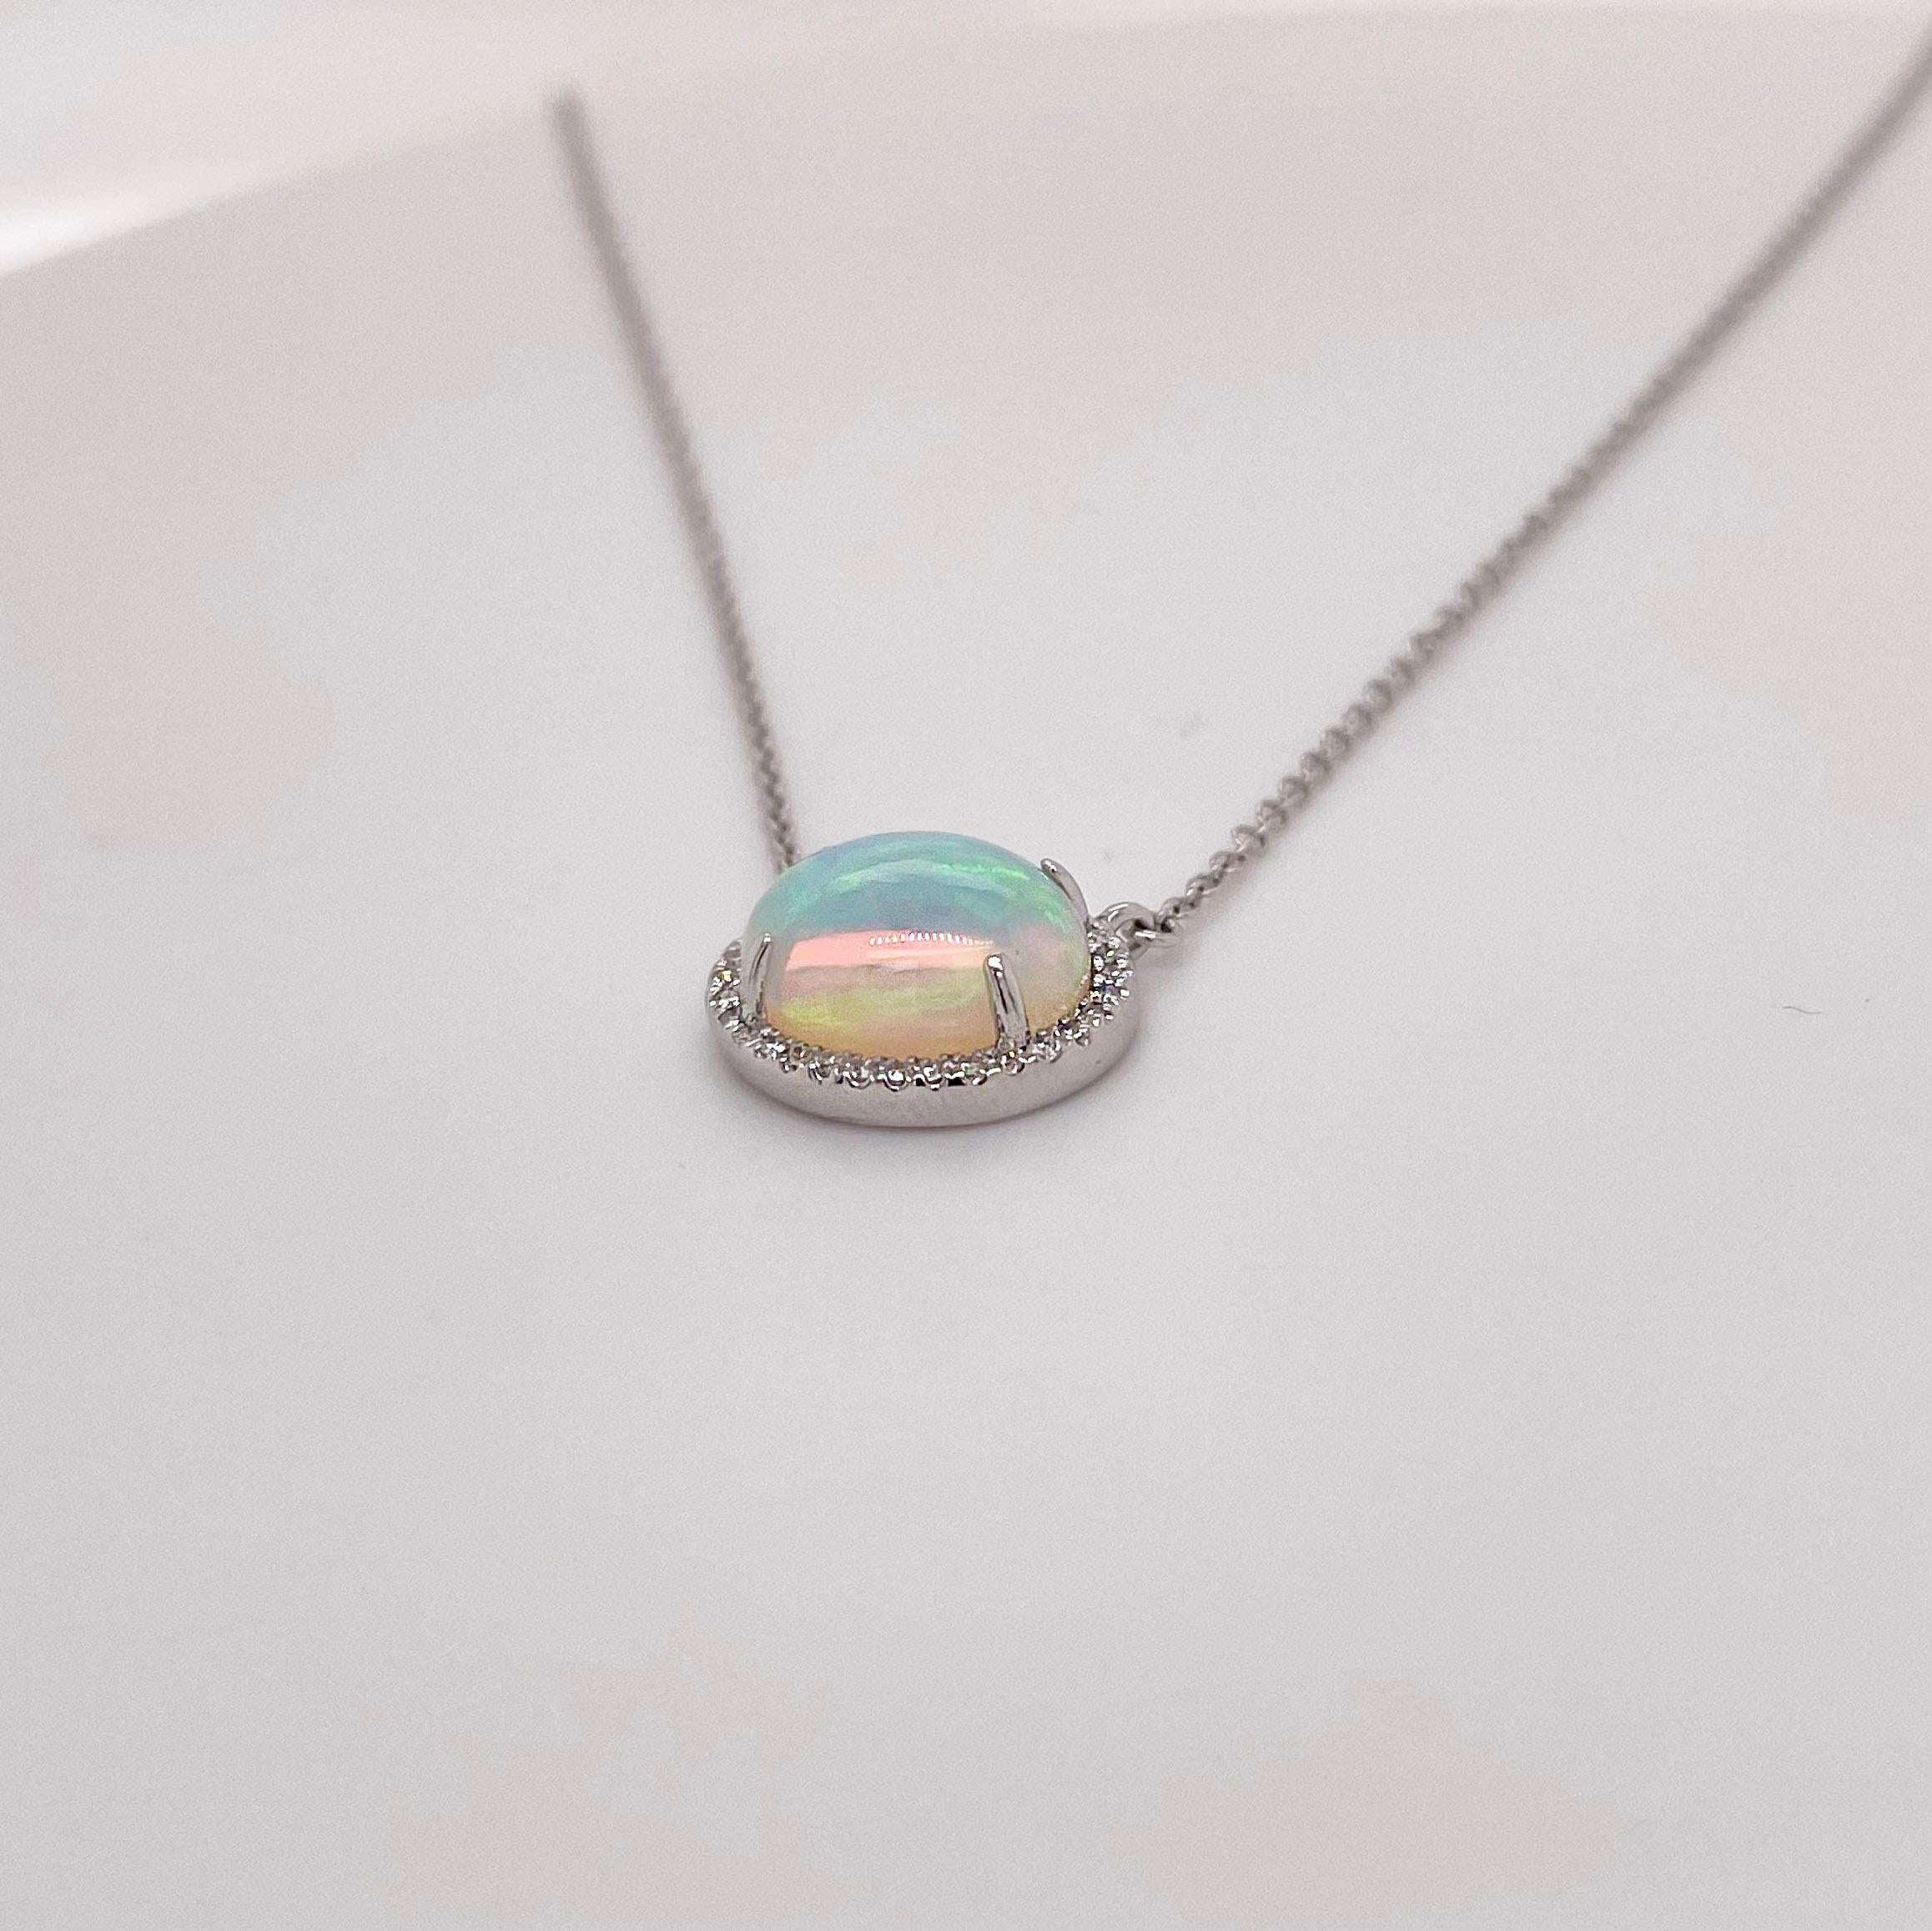 Opal's are precious gemstones that symbolize hope, purity and truth. They are also the gemstone for October, making this necklace the perfect October anniversary or October birthday gift. This design is classic and timeless. Made with natural,